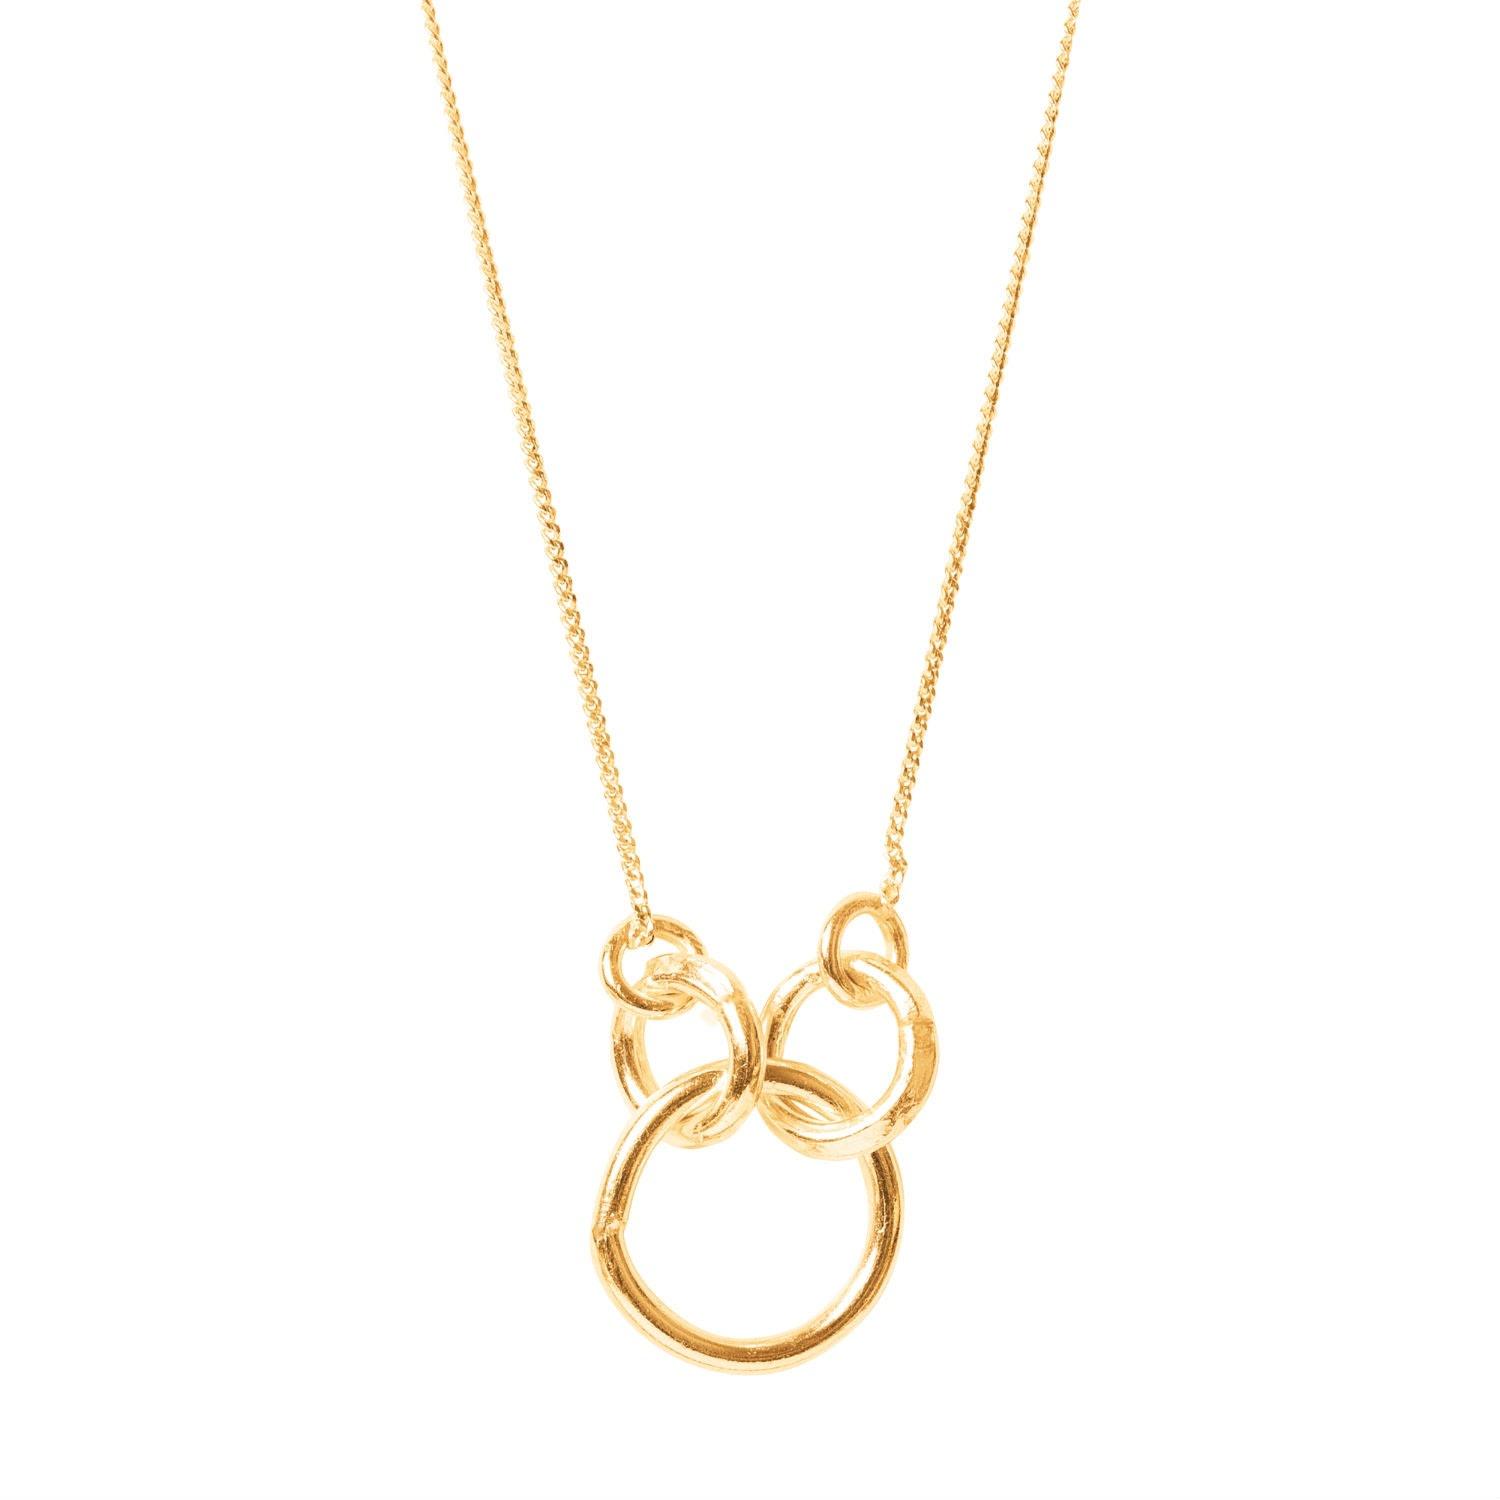 Lily Flo Jewellery Solid Gold Togetherness Circles Necklace in Metallic ...